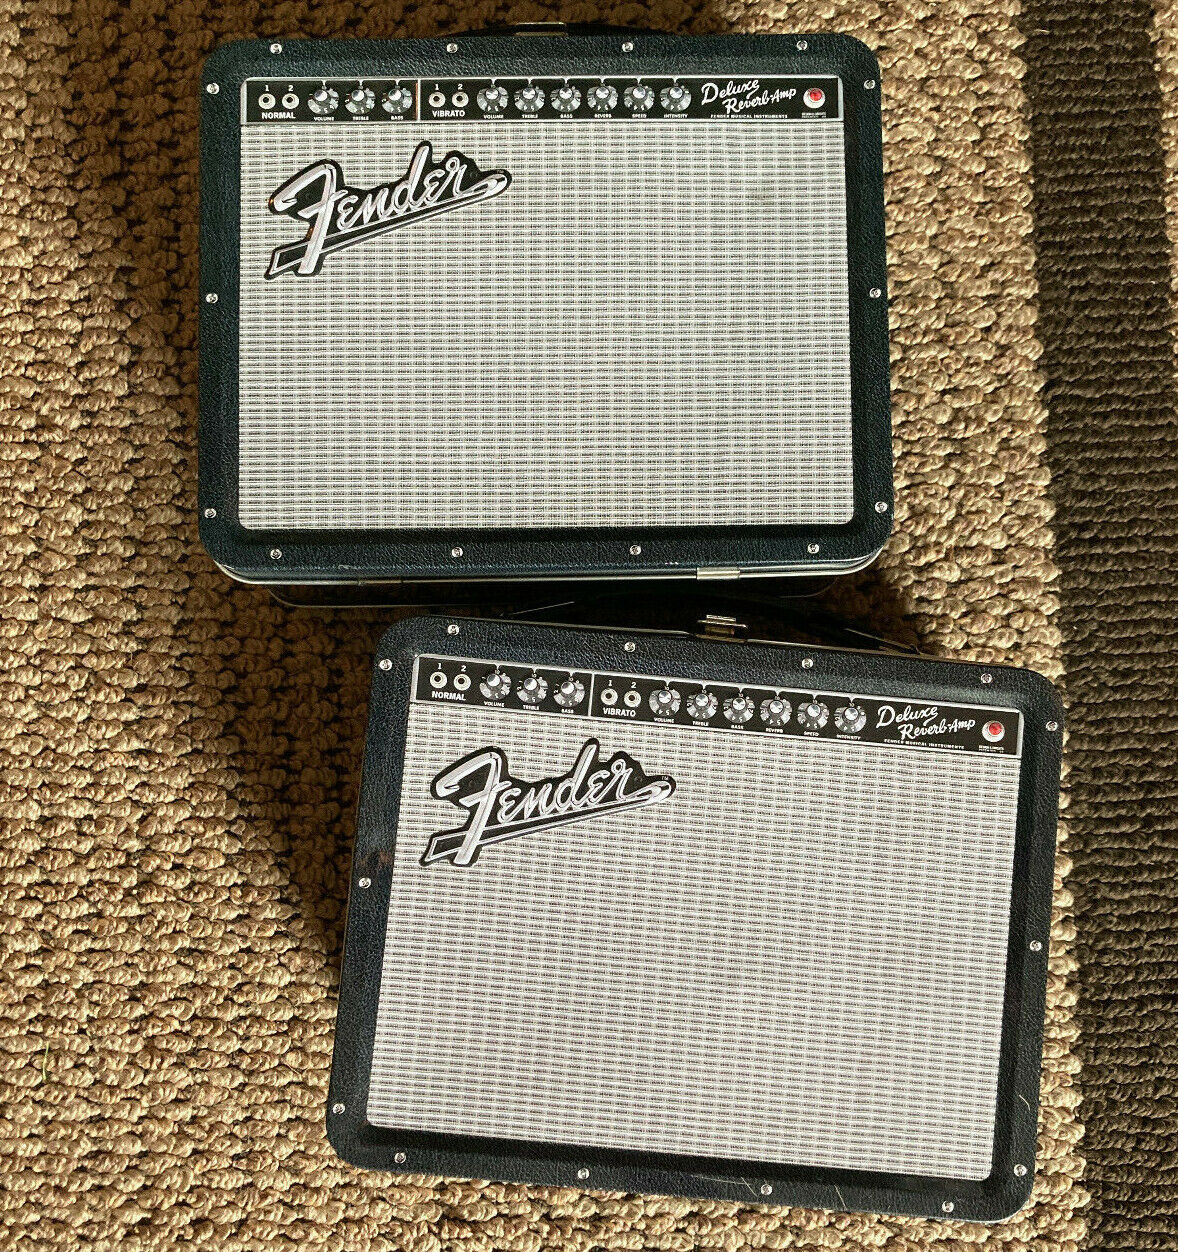 Set of Classic Fender Guitar Amplifier Lunch Box Metal Pail (Used)